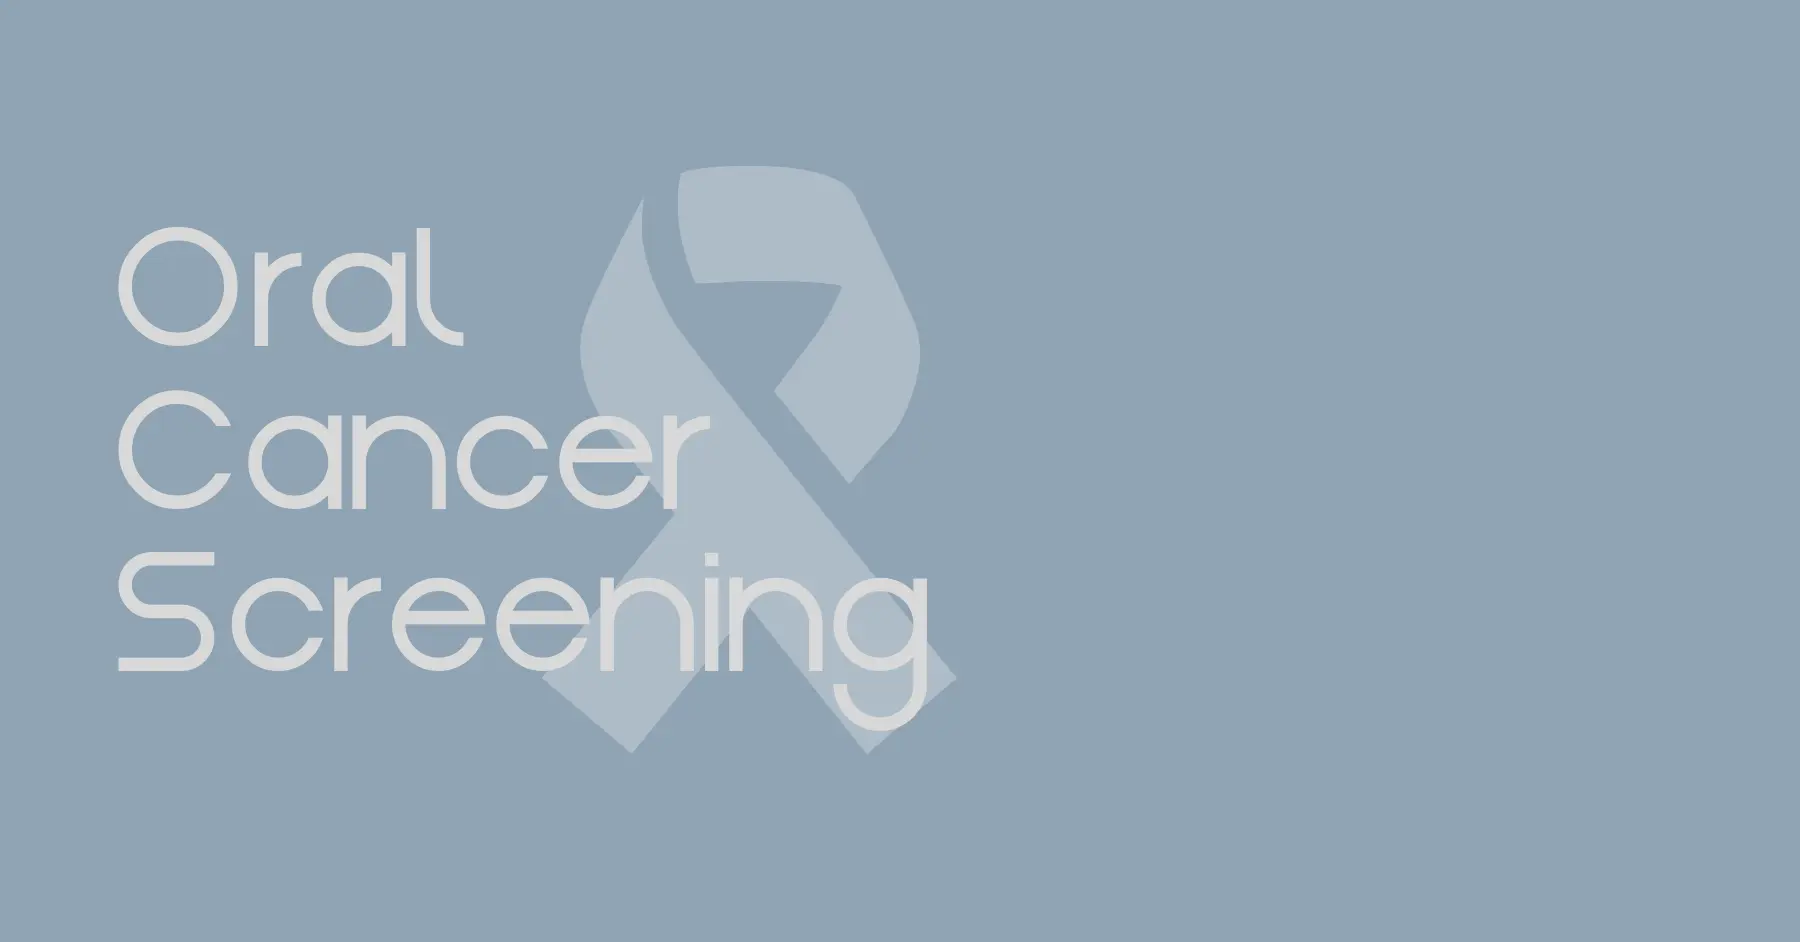 Oral Cancer Screening Graphic